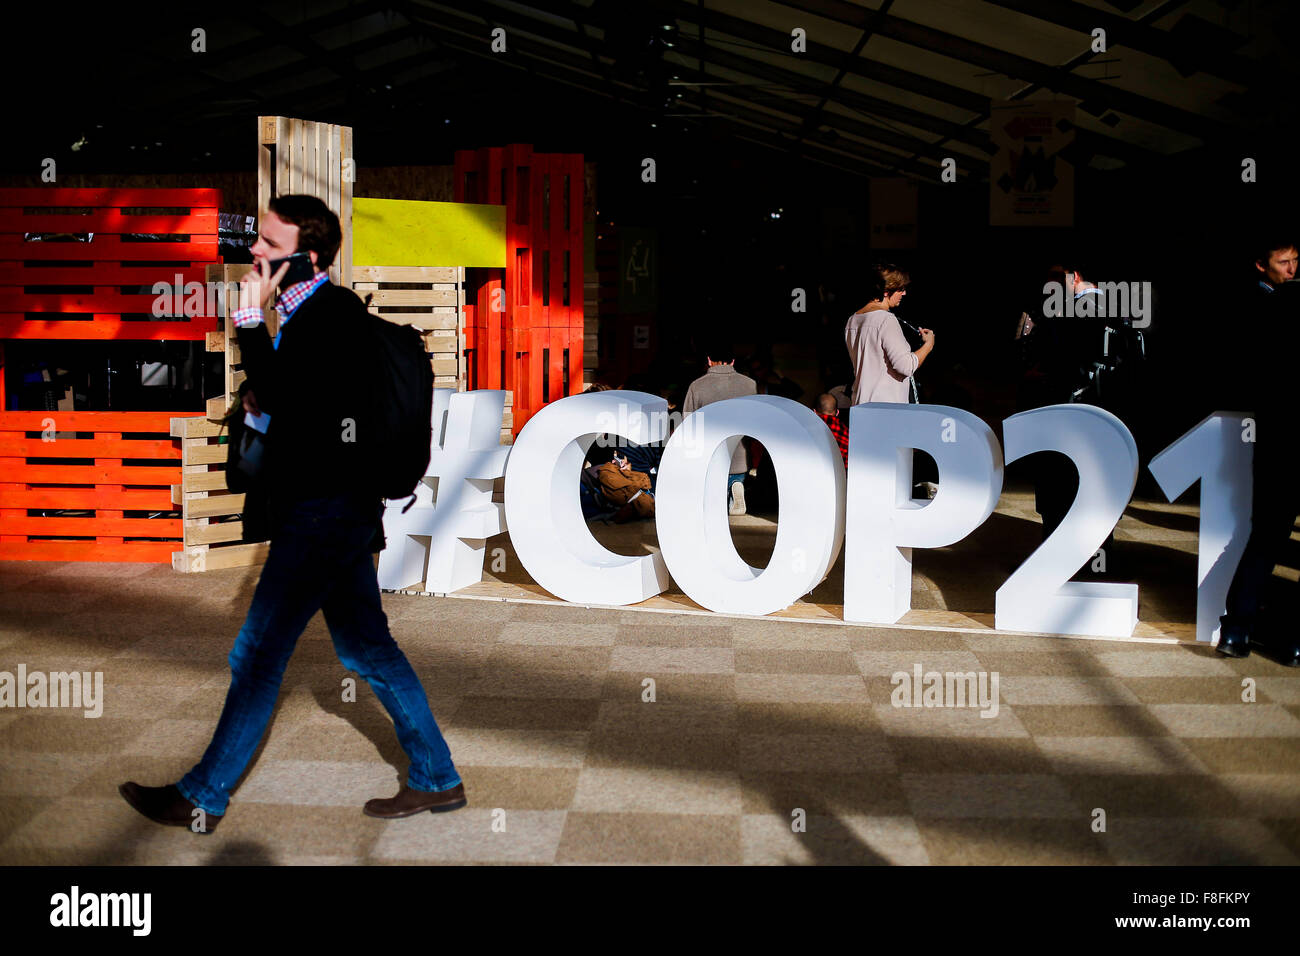 (151209) -- PARIS, Dec. 9, 2015 (Xinhua) -- Participants walk at the venue of Paris Climate Change Conference at Le Bourget on the northern suburbs of Paris, France, Dec. 9, 2015. French Foreign Minister and President of Paris Climate Conference Laurent Fabius presented a new clean version of text for a global climate agreement on Wednesday as a basis for further negotiations among countries in the next 48 hours. The main outstanding issues that remain to be resolved include post-2020 climate finance, ambition of action and how to reflect the principle of 'common but differentiated responsibil Stock Photo